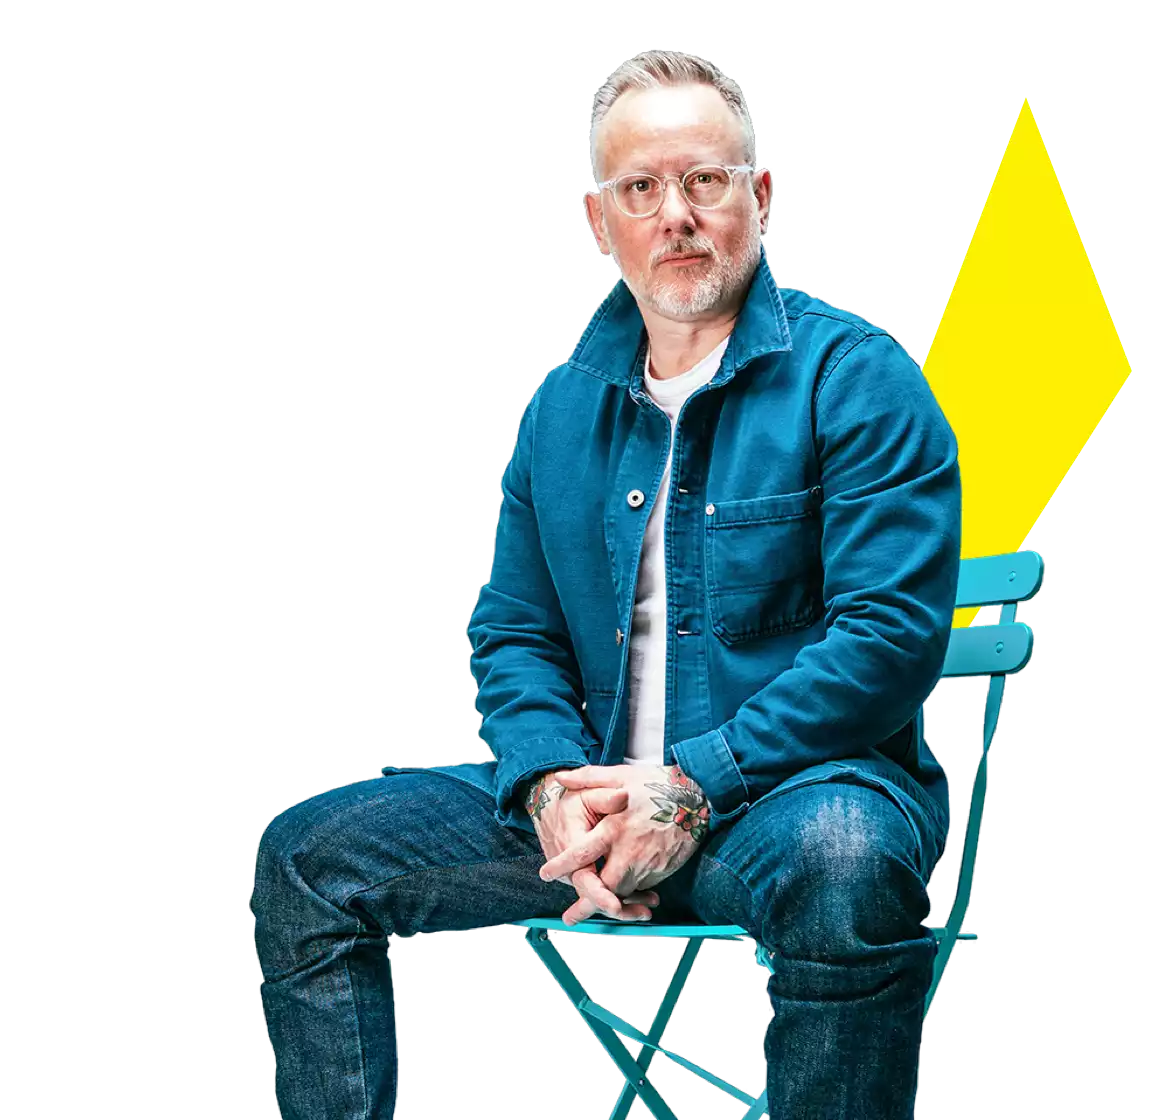 a man with glasses sitting down on a blue chair, wearing a jeans and jean jacket, and looking straightahead